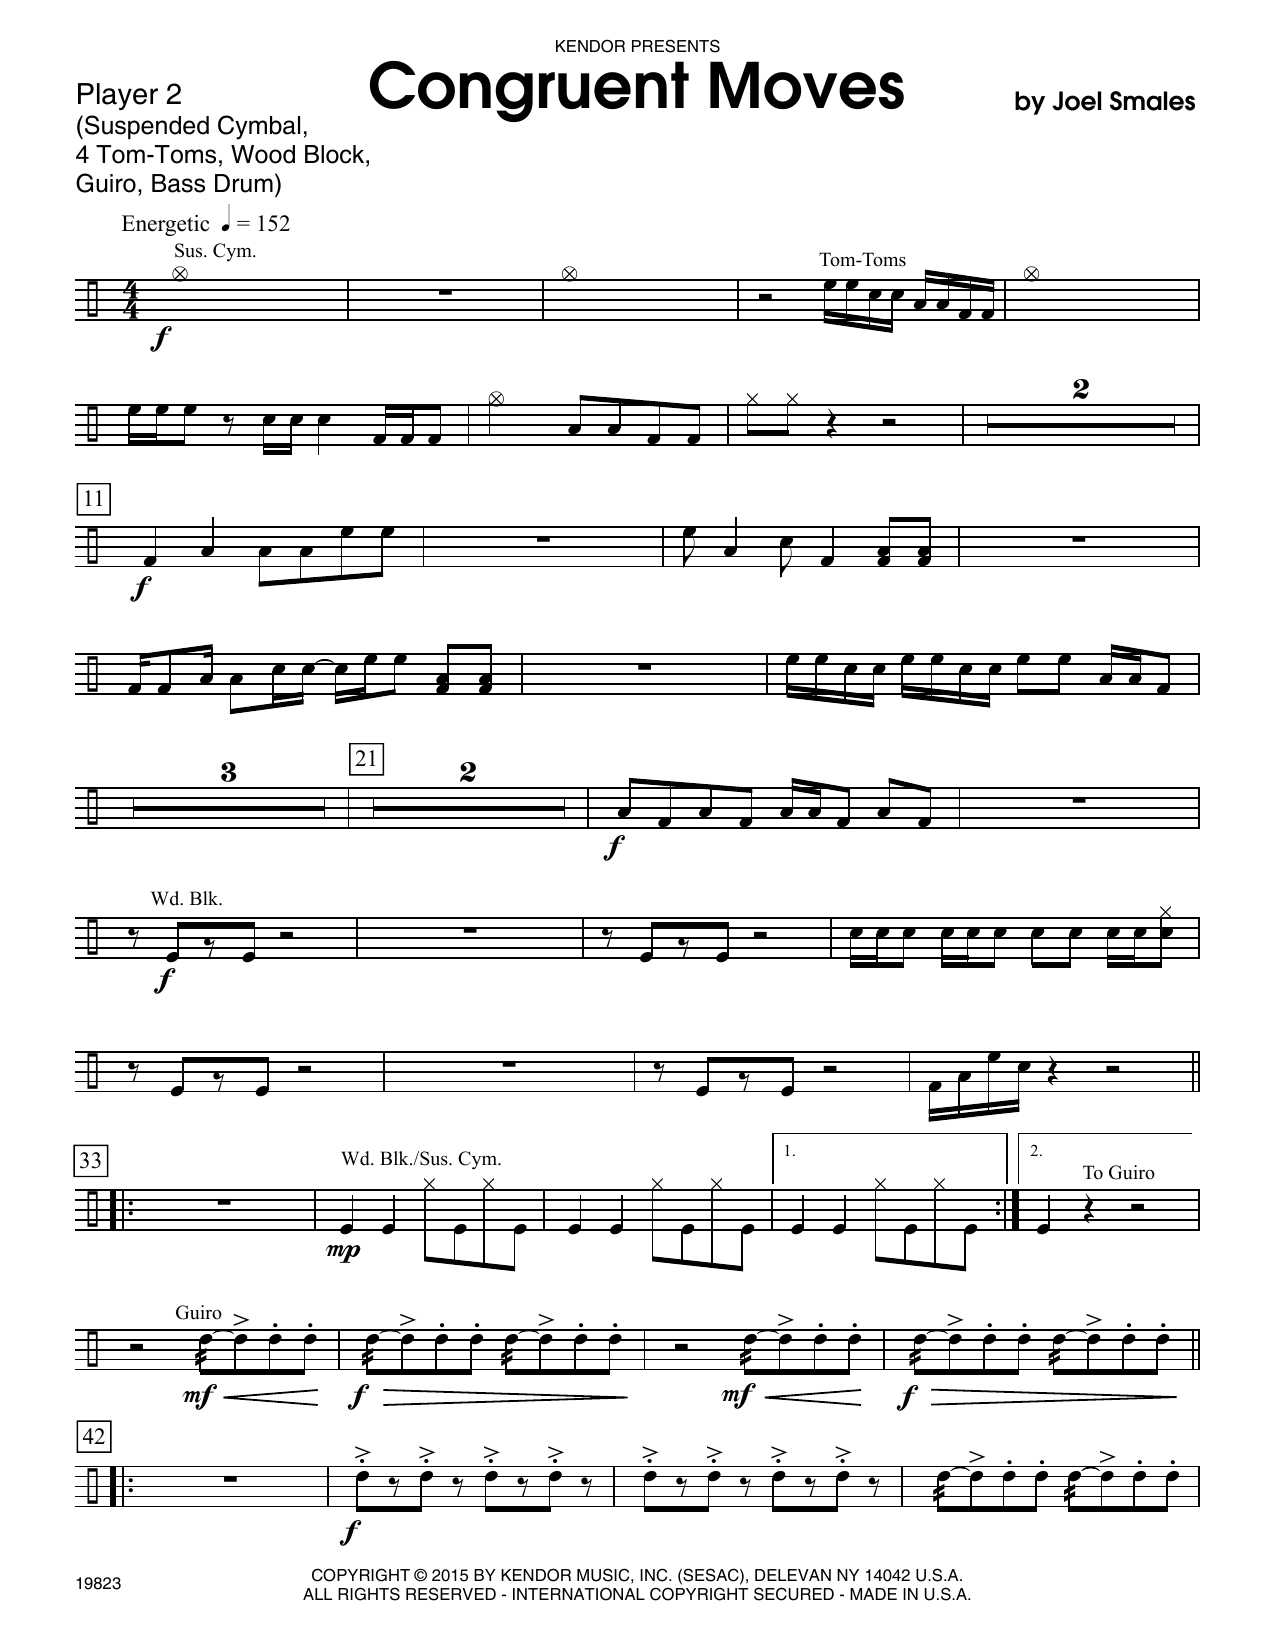 Download Joel Smales Congruent Moves - Percussion 2 Sheet Music